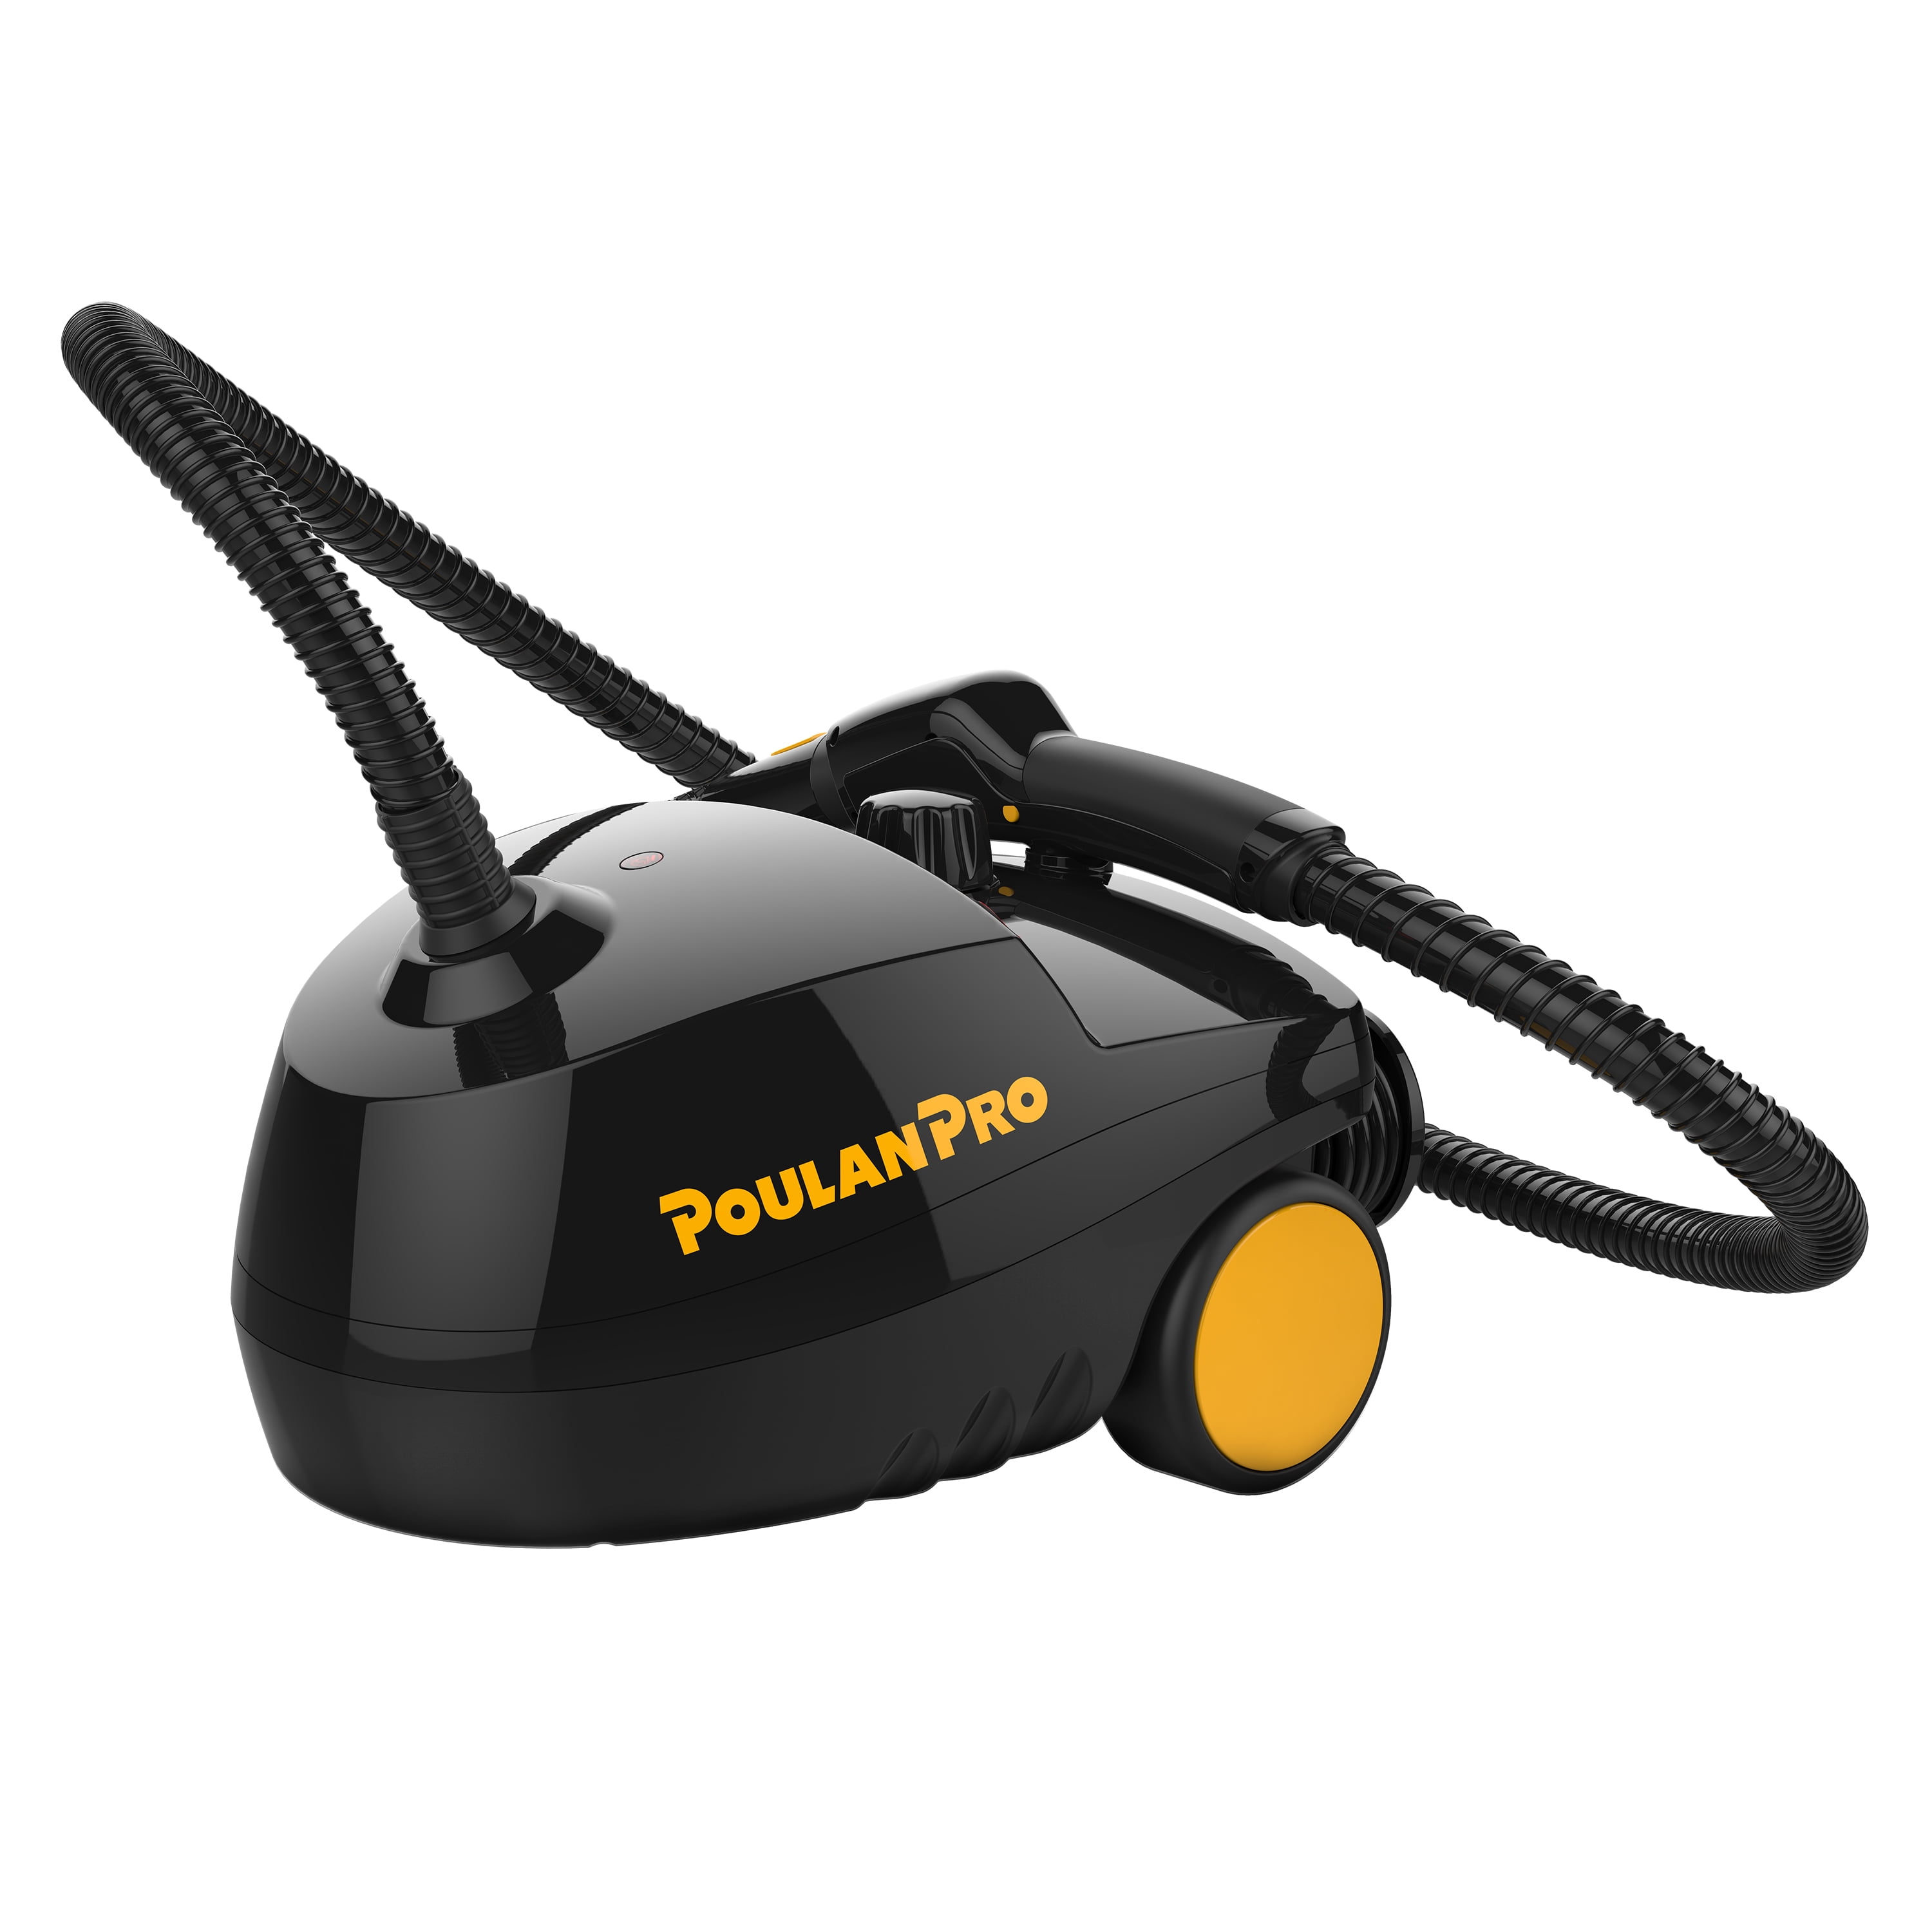 Steam Cleaner Portable Multi Purpose Versatile Cleaning Machine Cars Home Power 